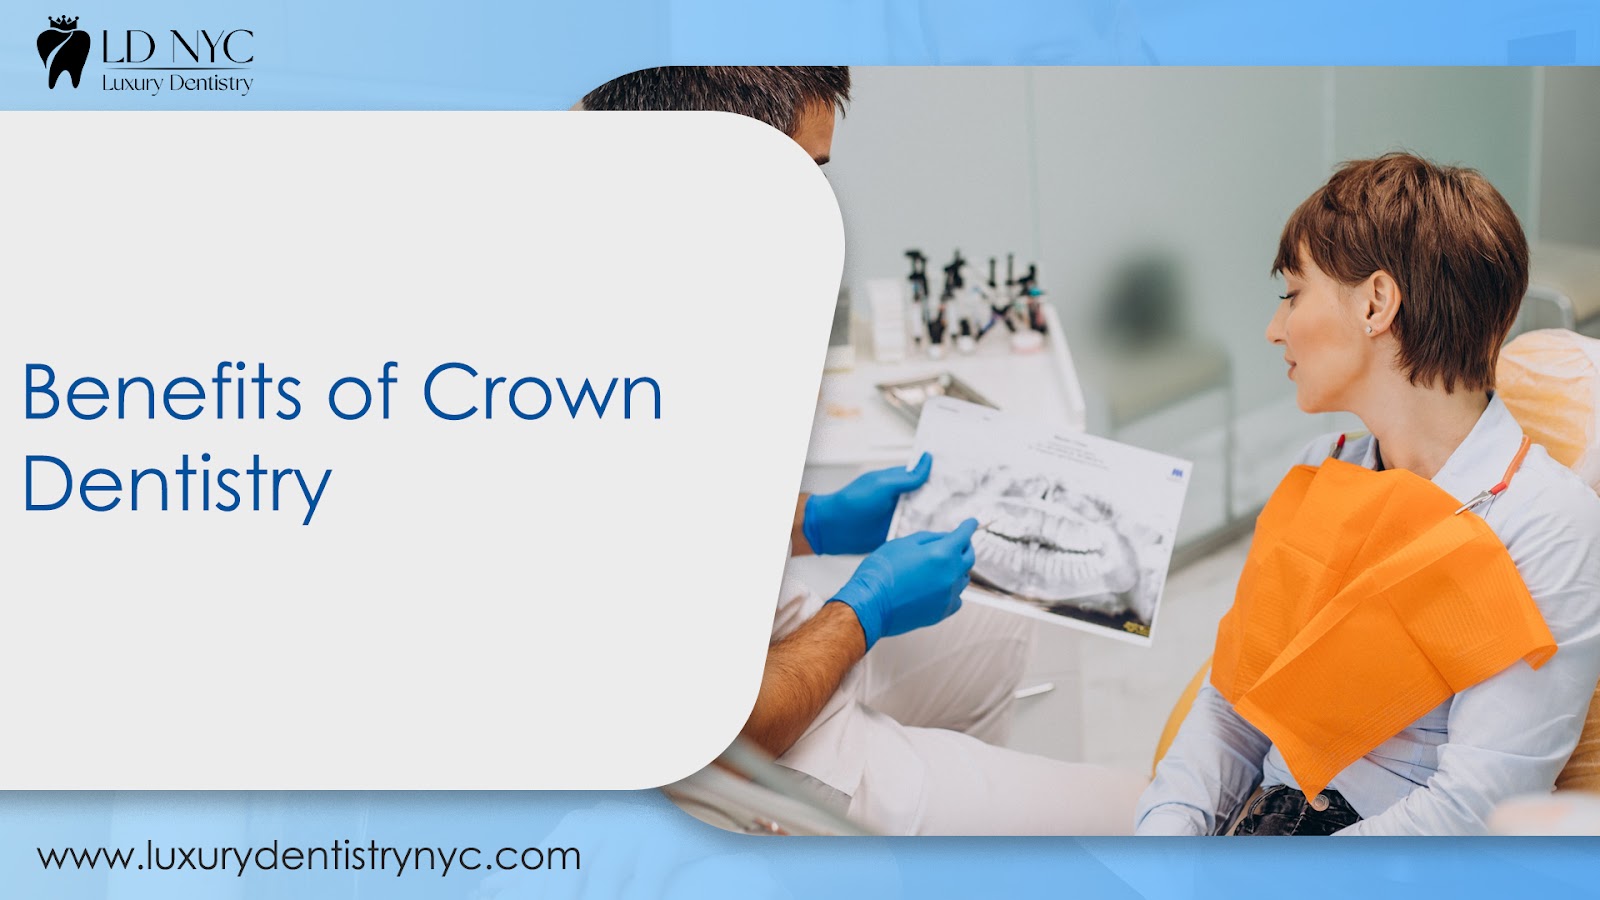 Benefits of Crown Dentistry